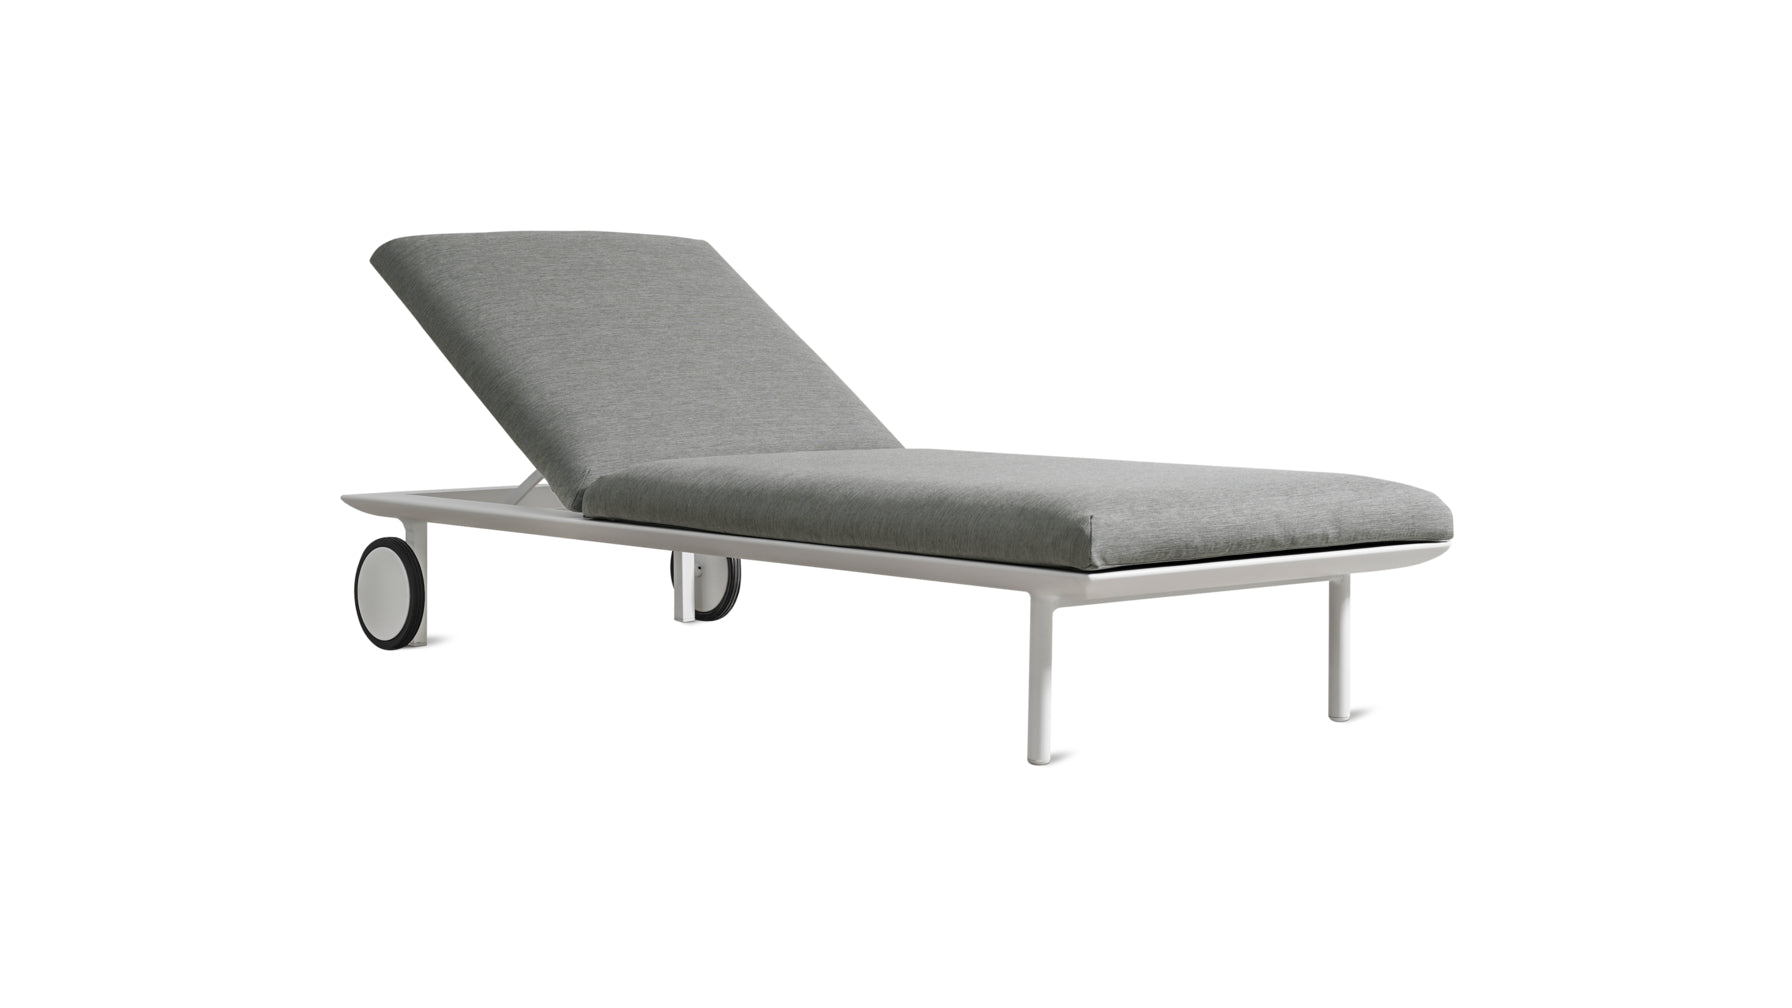 Laidback Outdoor Lounger, Aluminum Pepper - Image 1